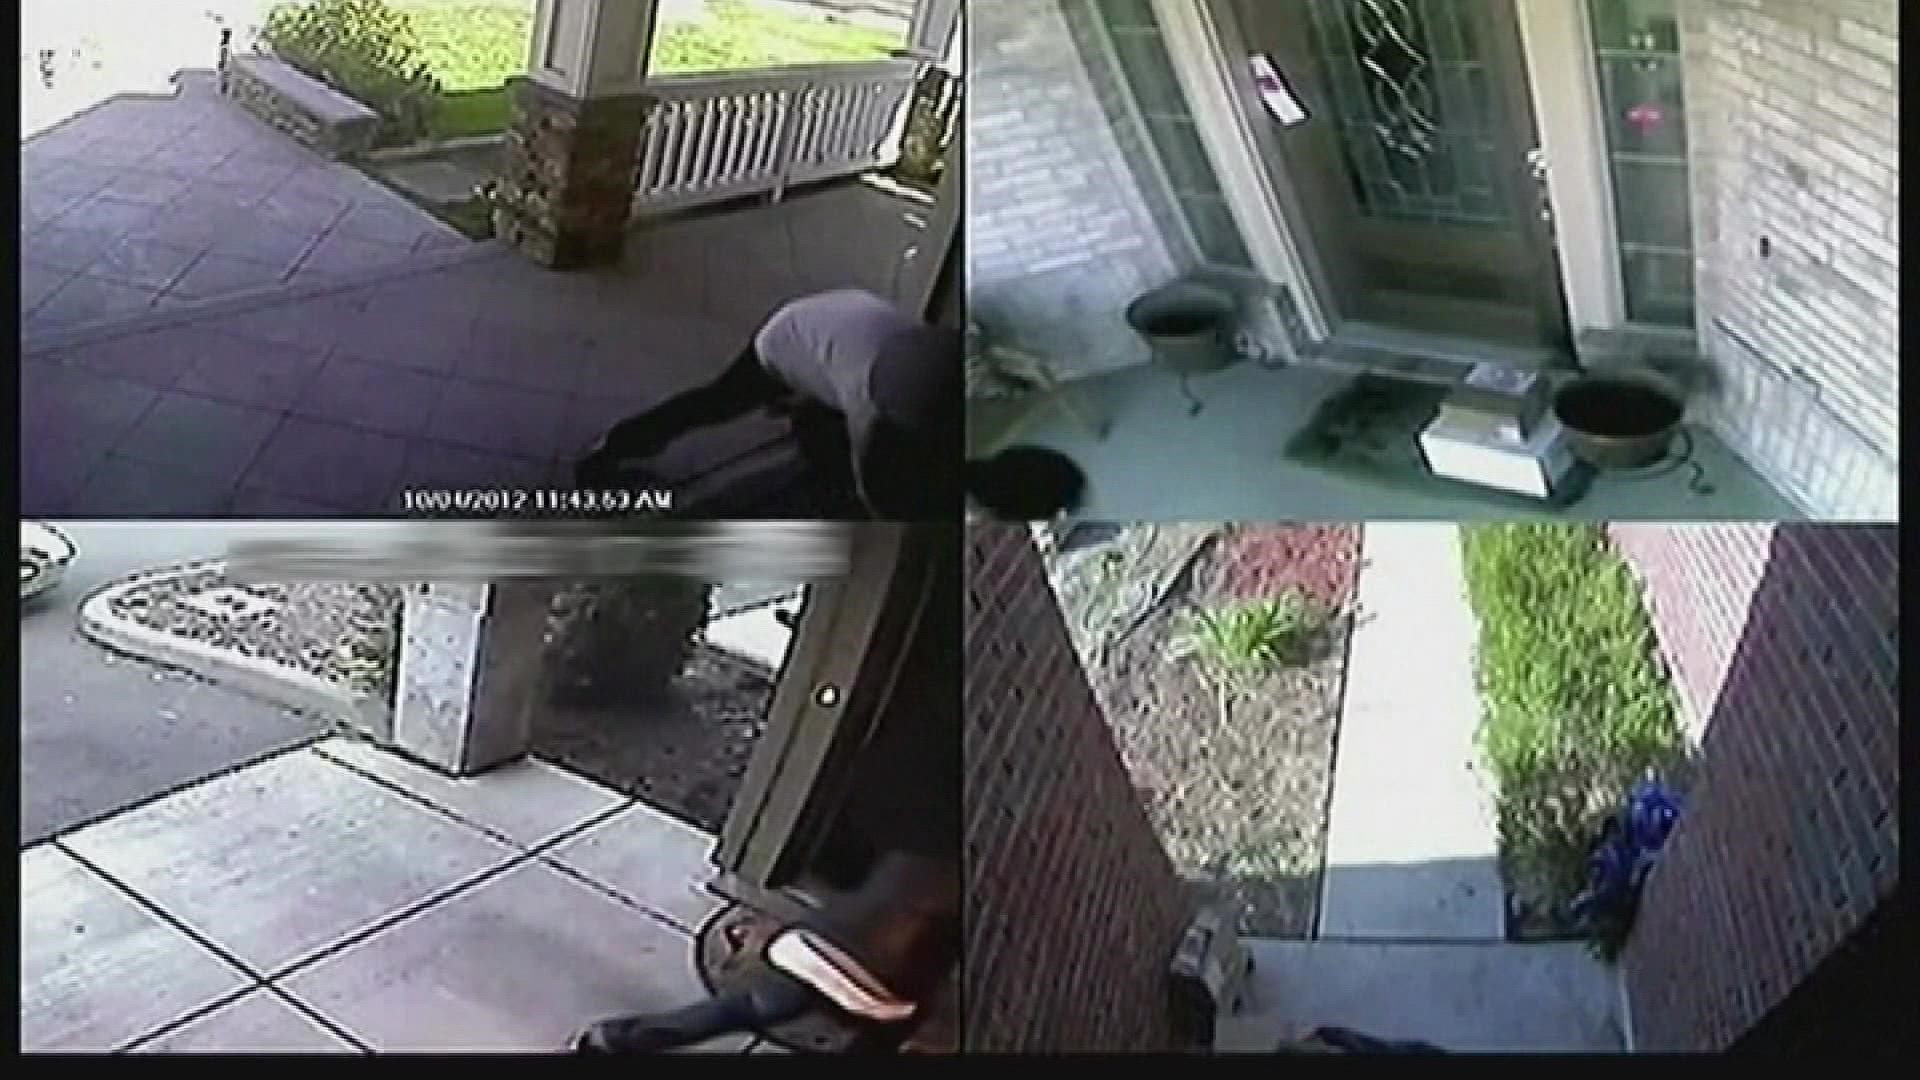 A porch pirate snagged a package right off the doorstep of a Phoenix home. An Xbox was inside.